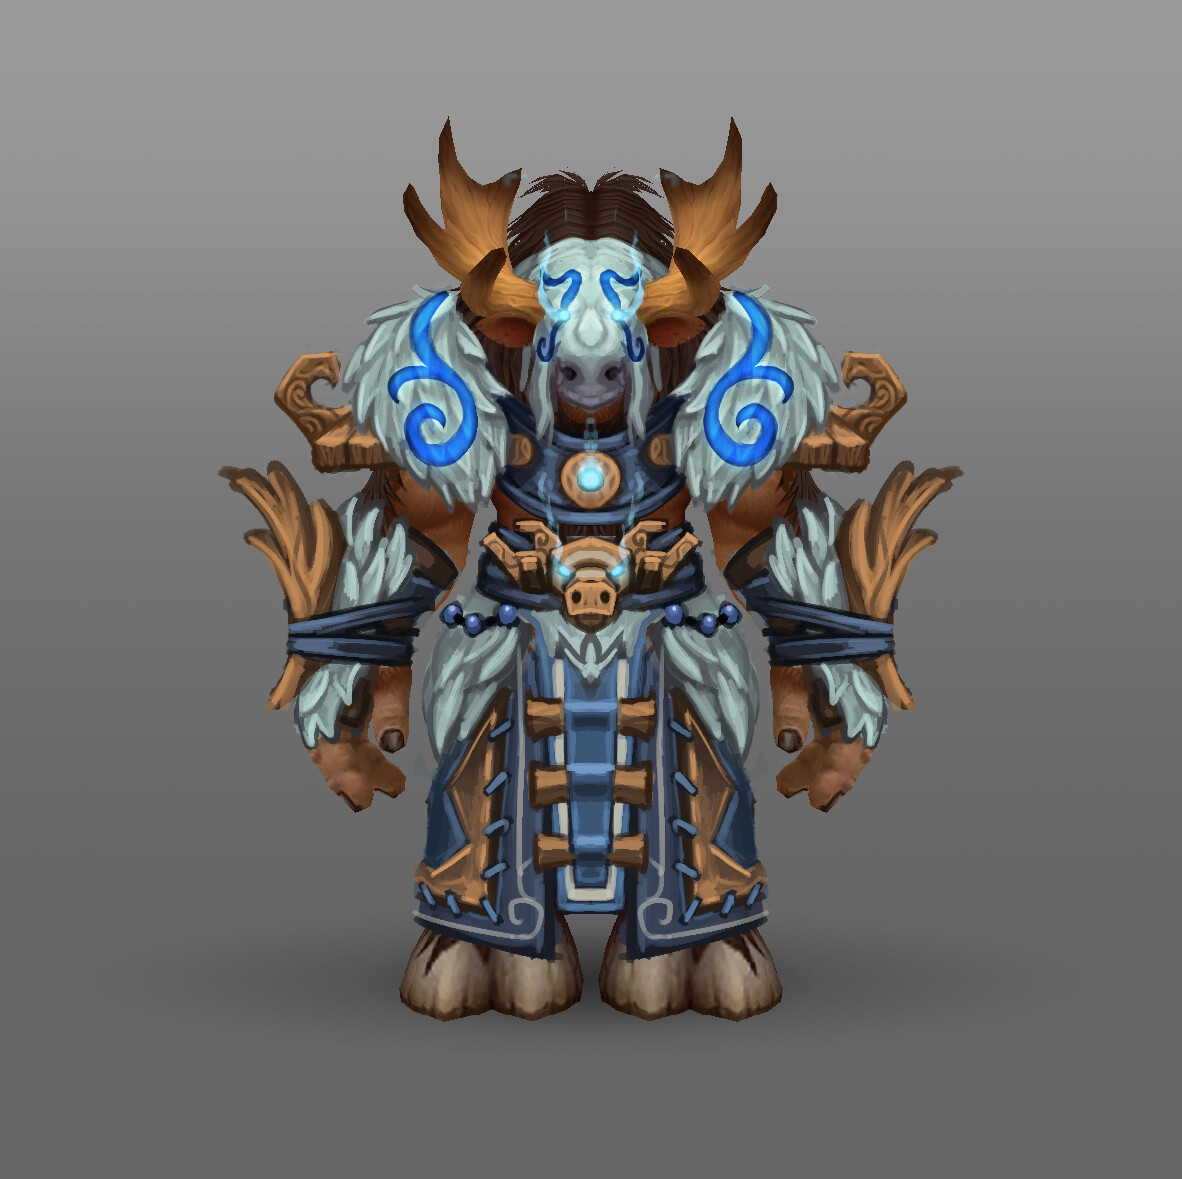 Druid

Based around Eche'ro. As Cenarius blessed Huln Highmountain due to him saving Eche'ro, I thought it would be a fitting theme for the Druid set.